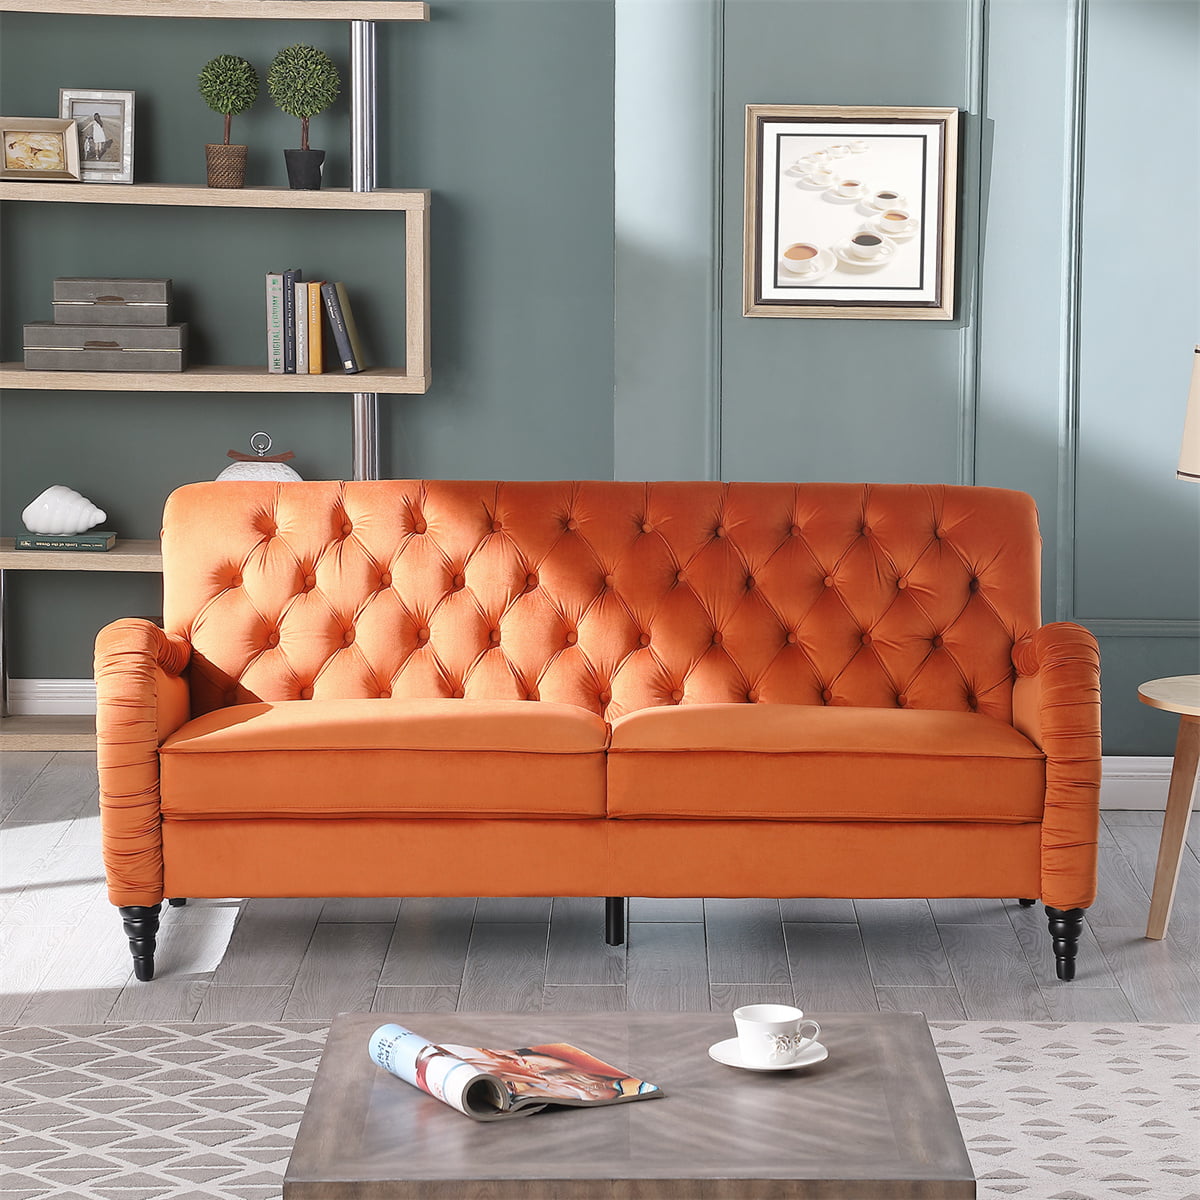 Wood Modern Velvet Upholstered Outdoor Sofa Couch with Orange Cushions, 3  Seat Tufted Back with Nail Arms with 2 Pillows TN201E-126 - The Home Depot